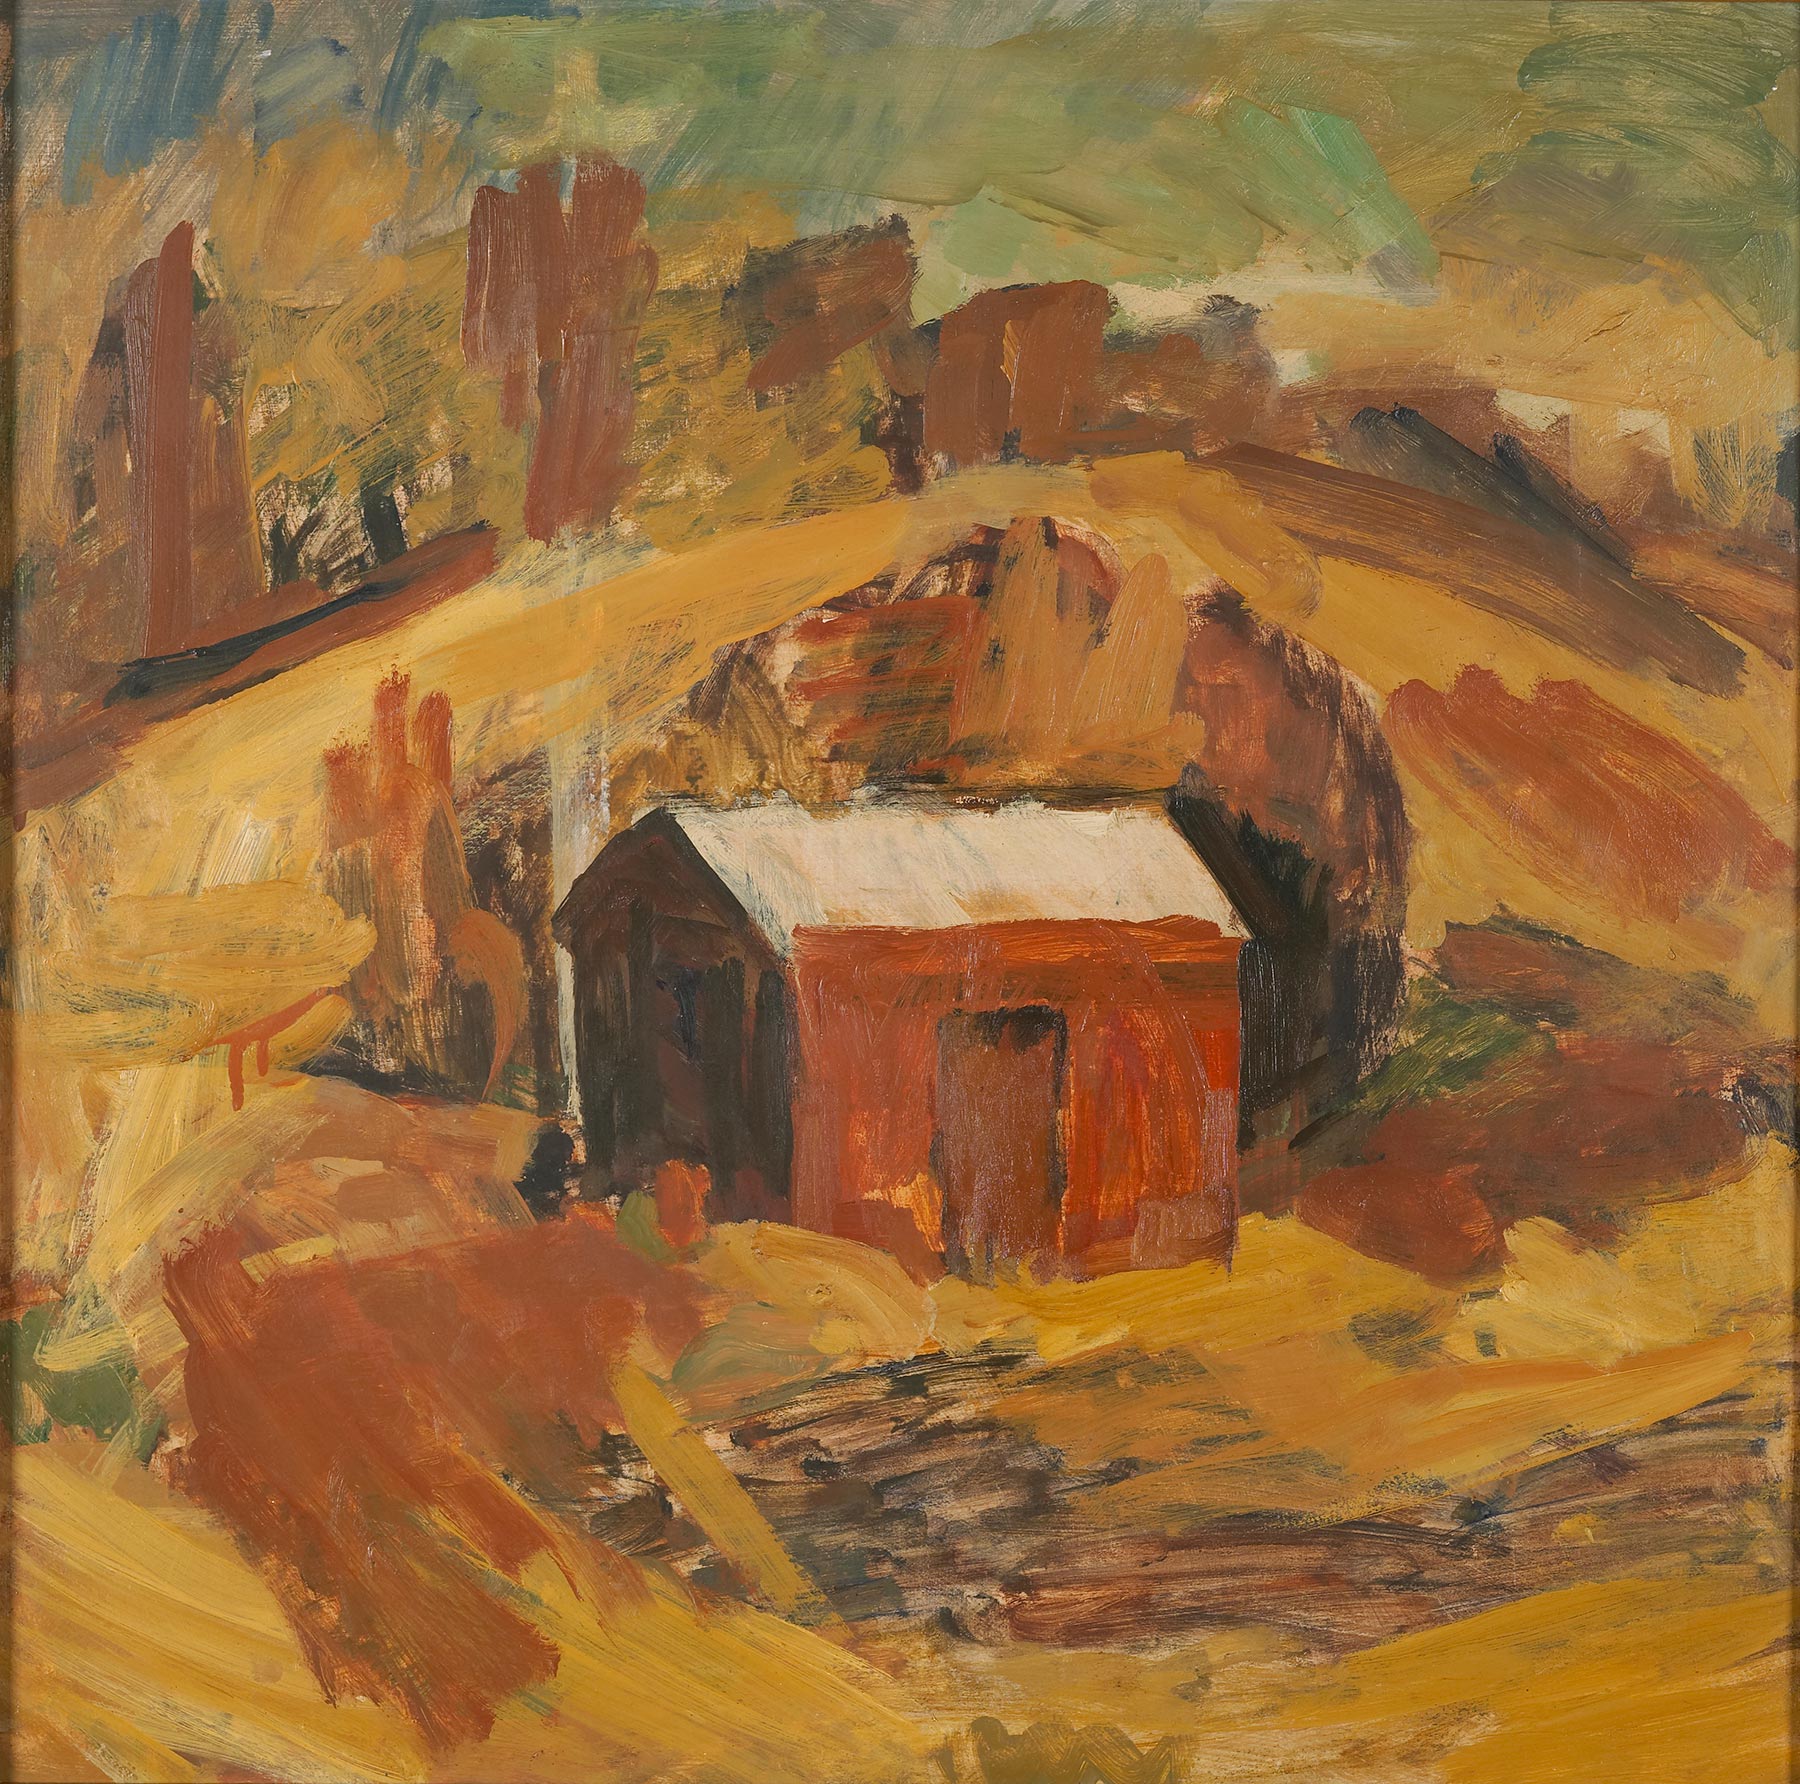 Oil painting of shed